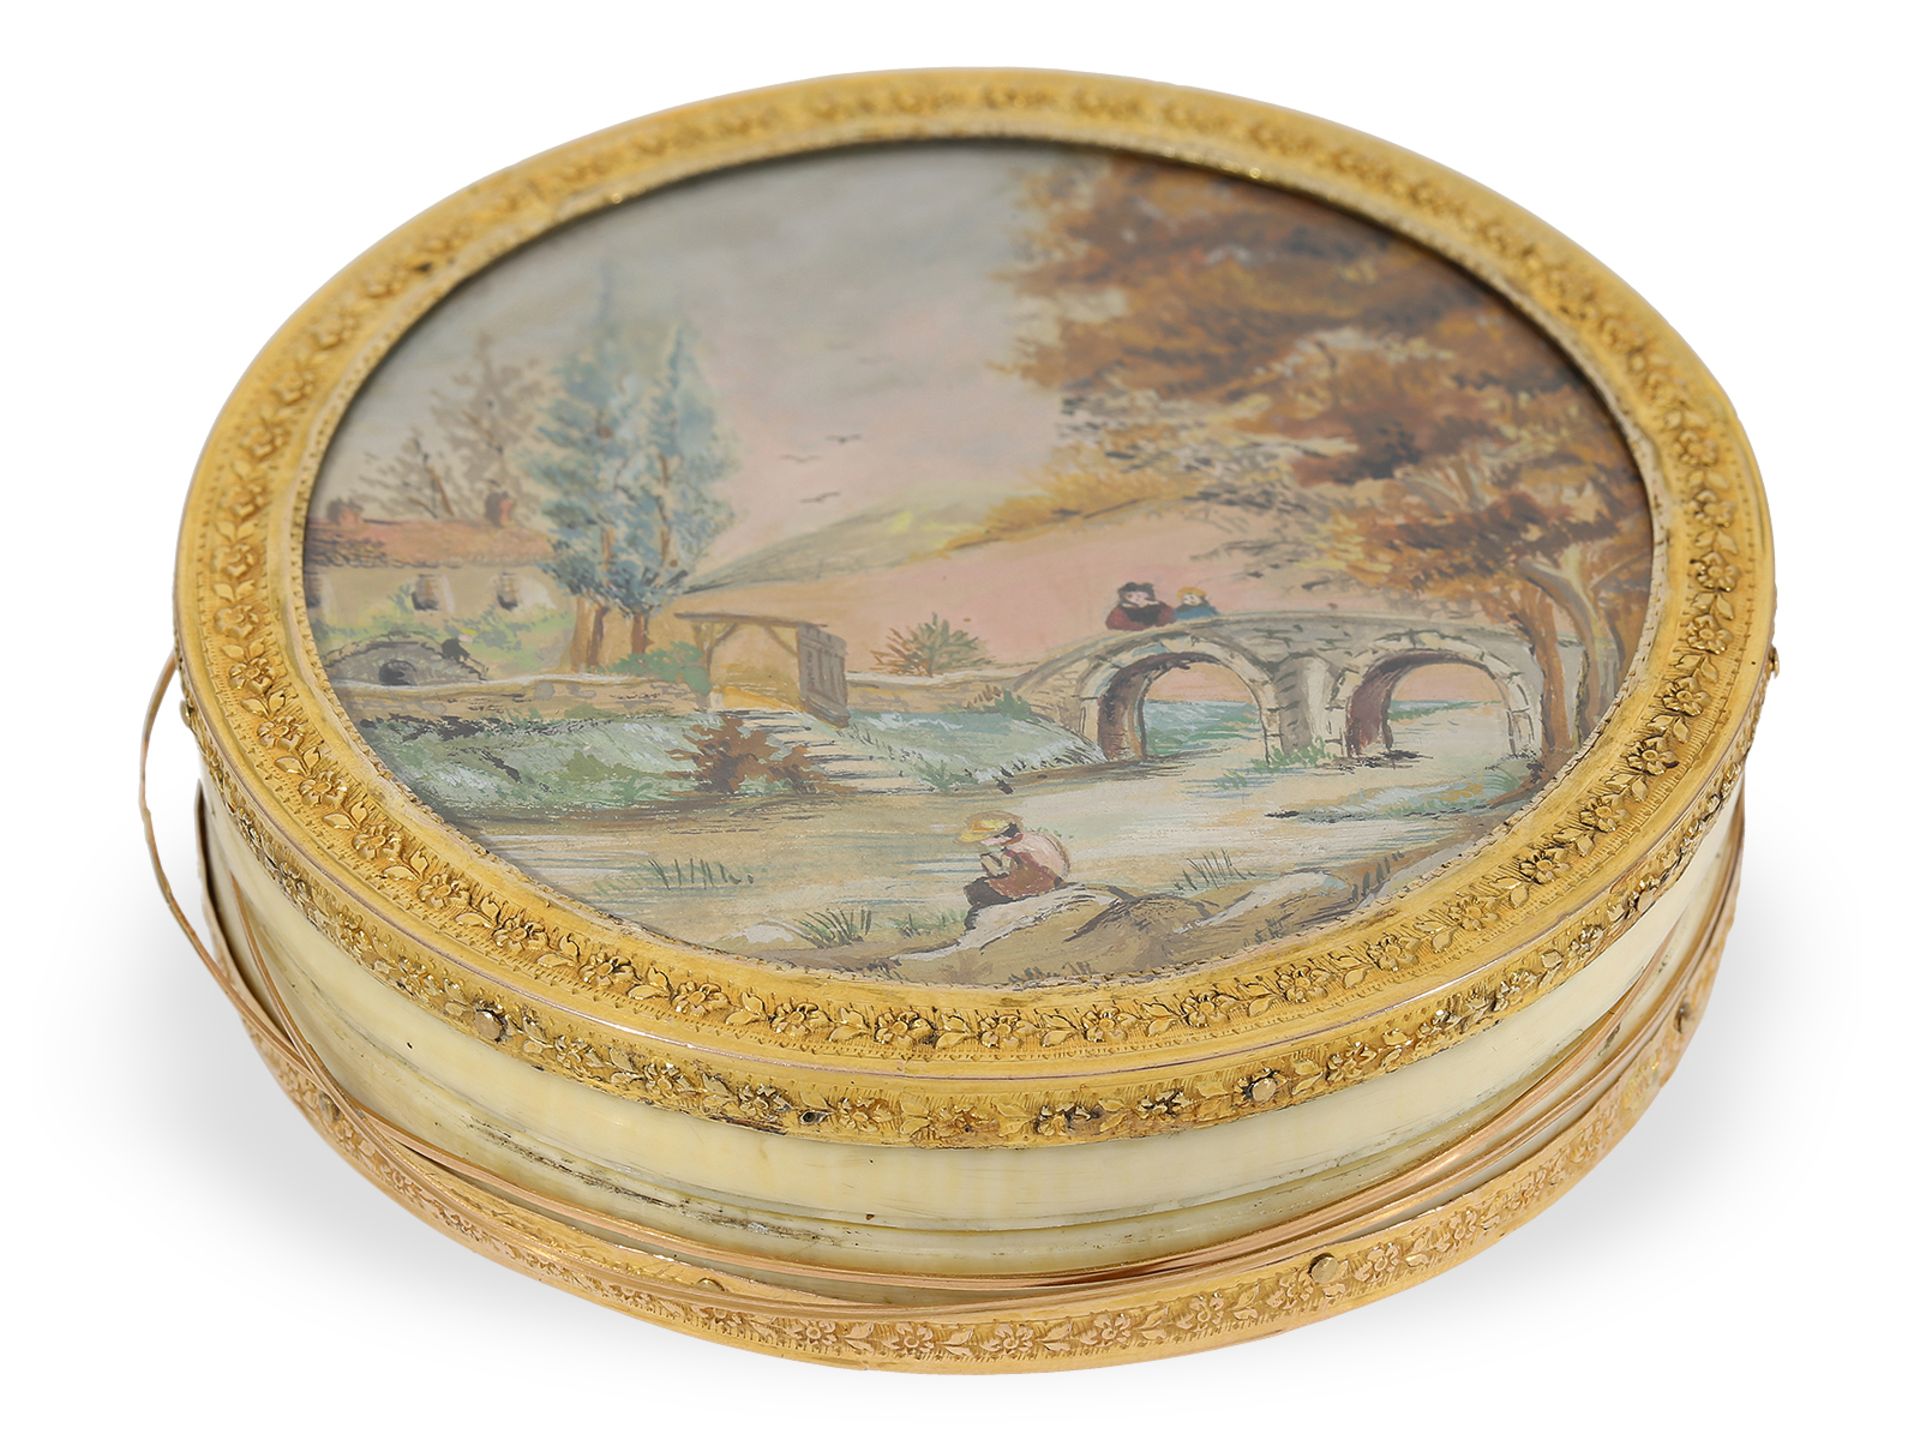 Unique antique snuff box, gold/ivory/tortoiseshell, painting "Circus Spectacle with Rise of a Balloo